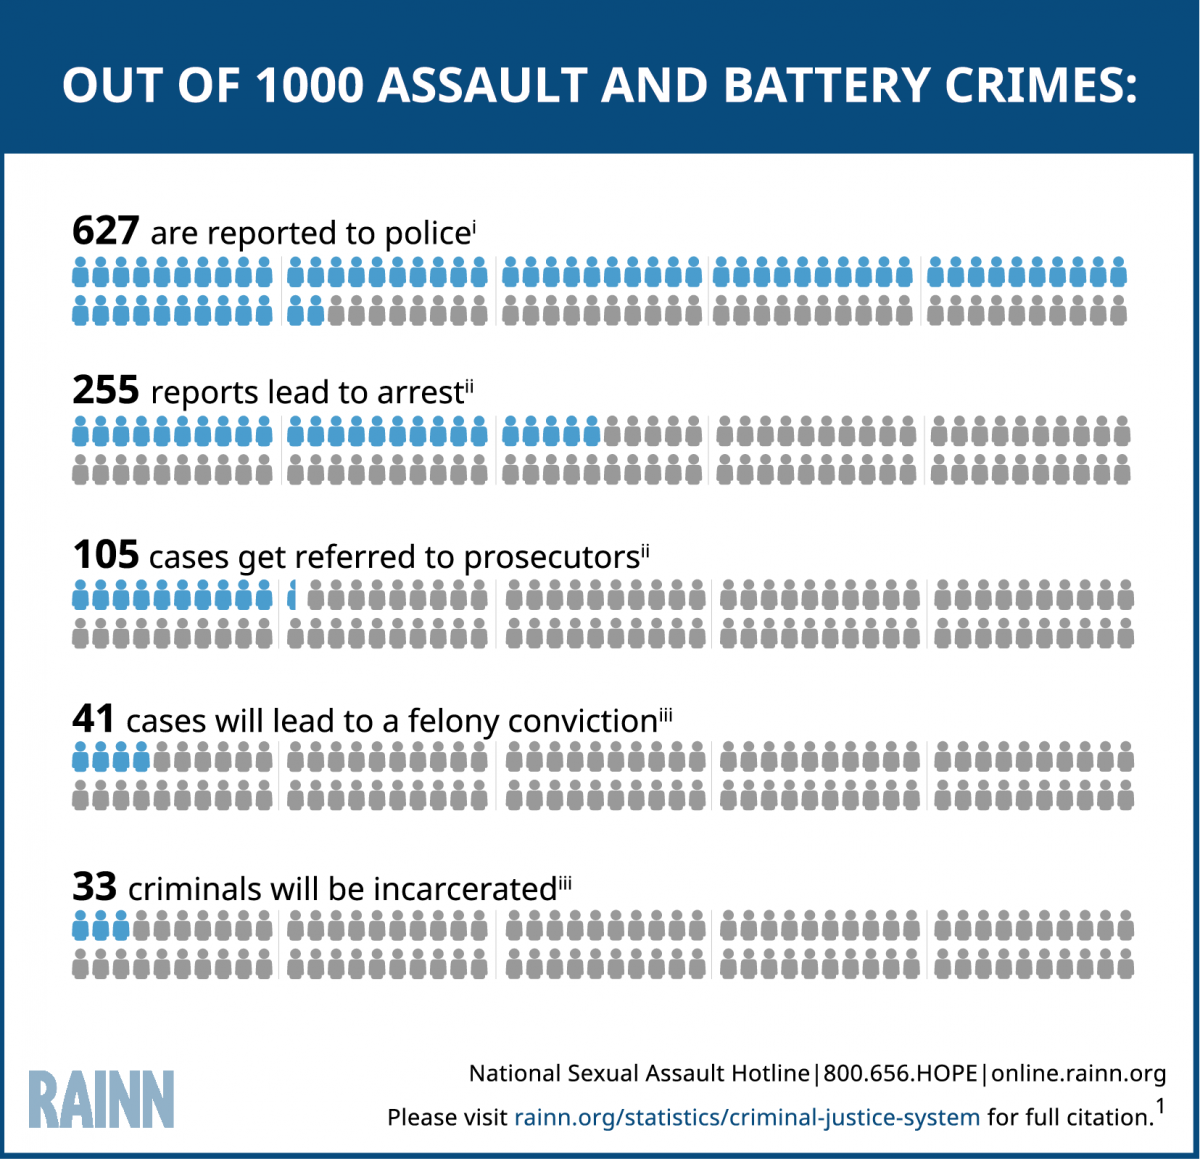 Graphic explaining the number of perpetrators of assault and battery that will serve jail or prison time. The graphic visually contrasts the much lower jail and prison rates for perpetrators of rape. Out of every 1,000 assault and battery crimes, 627 are reported to police, 255 reports lead to arrest, 105 cases get referred to prosecutors, 41 cases will lead to a felony conviction, 33 perpetrators of these crimes will be incarcerated.